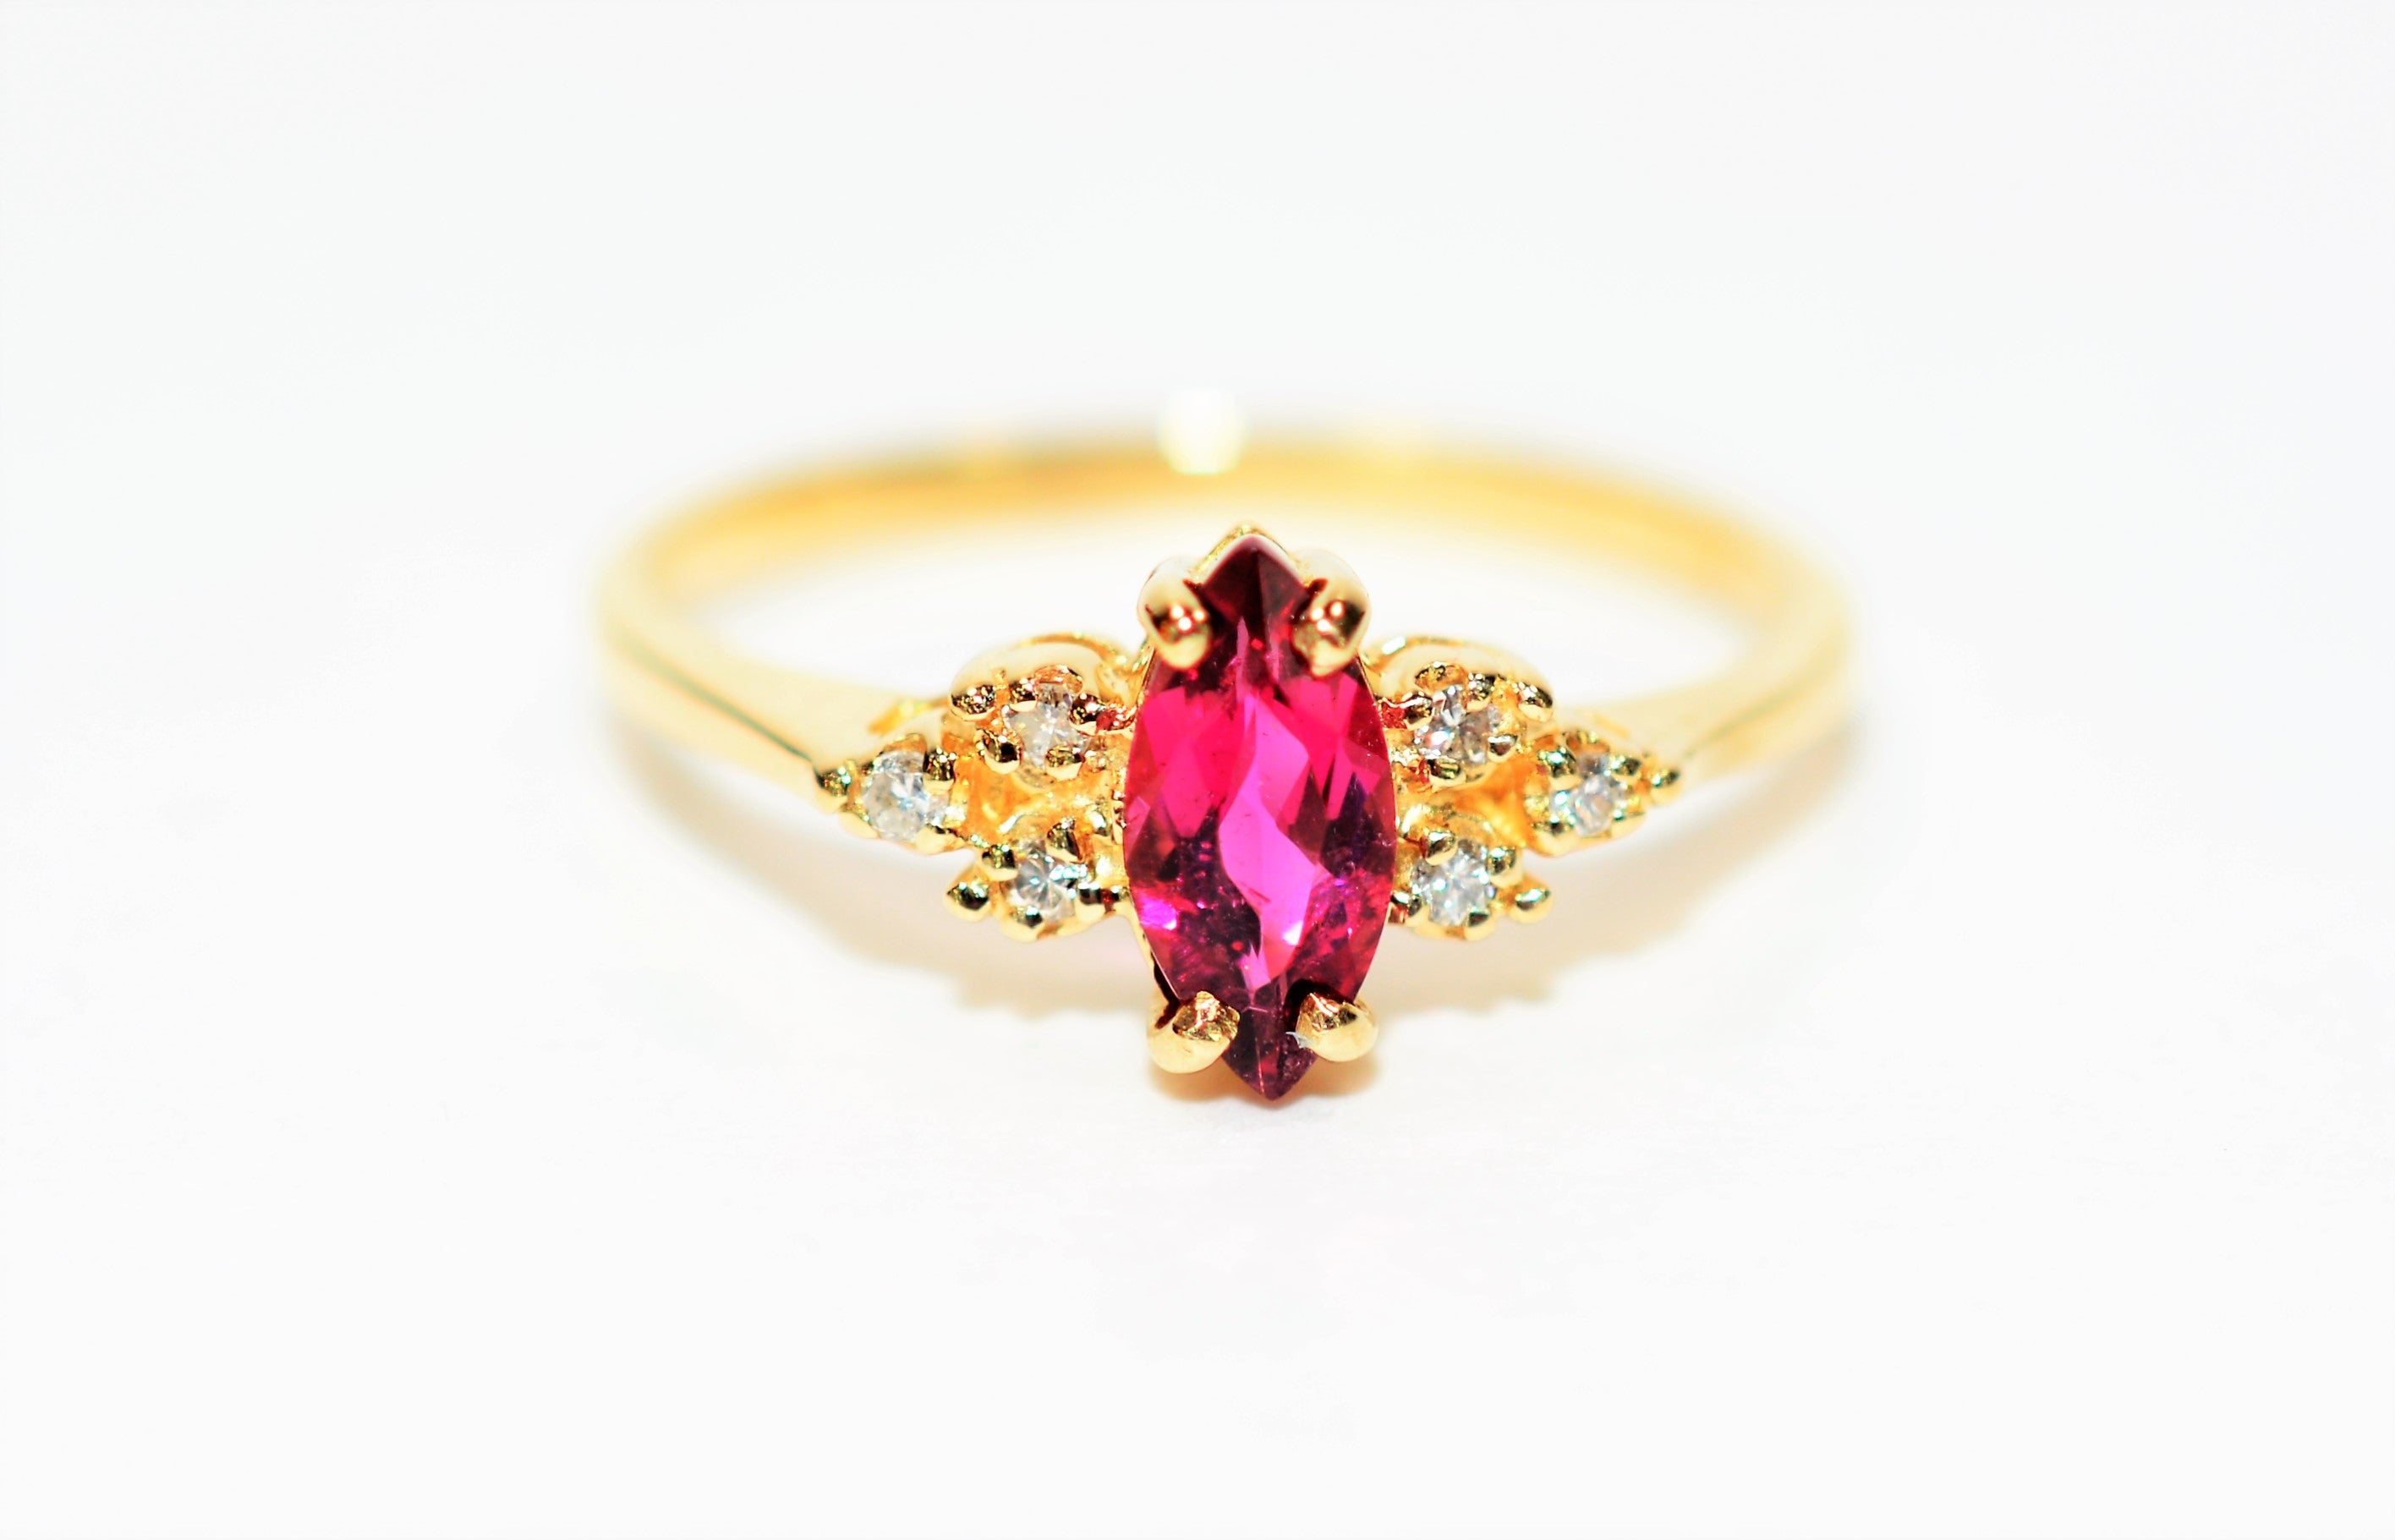 Natural Ruby & Diamond Ring 14K Solid Gold .56tcw Ruby Ring Marquise Ring Gemstone Ring July Birthstone Engagement Ring Women's Ring Estate